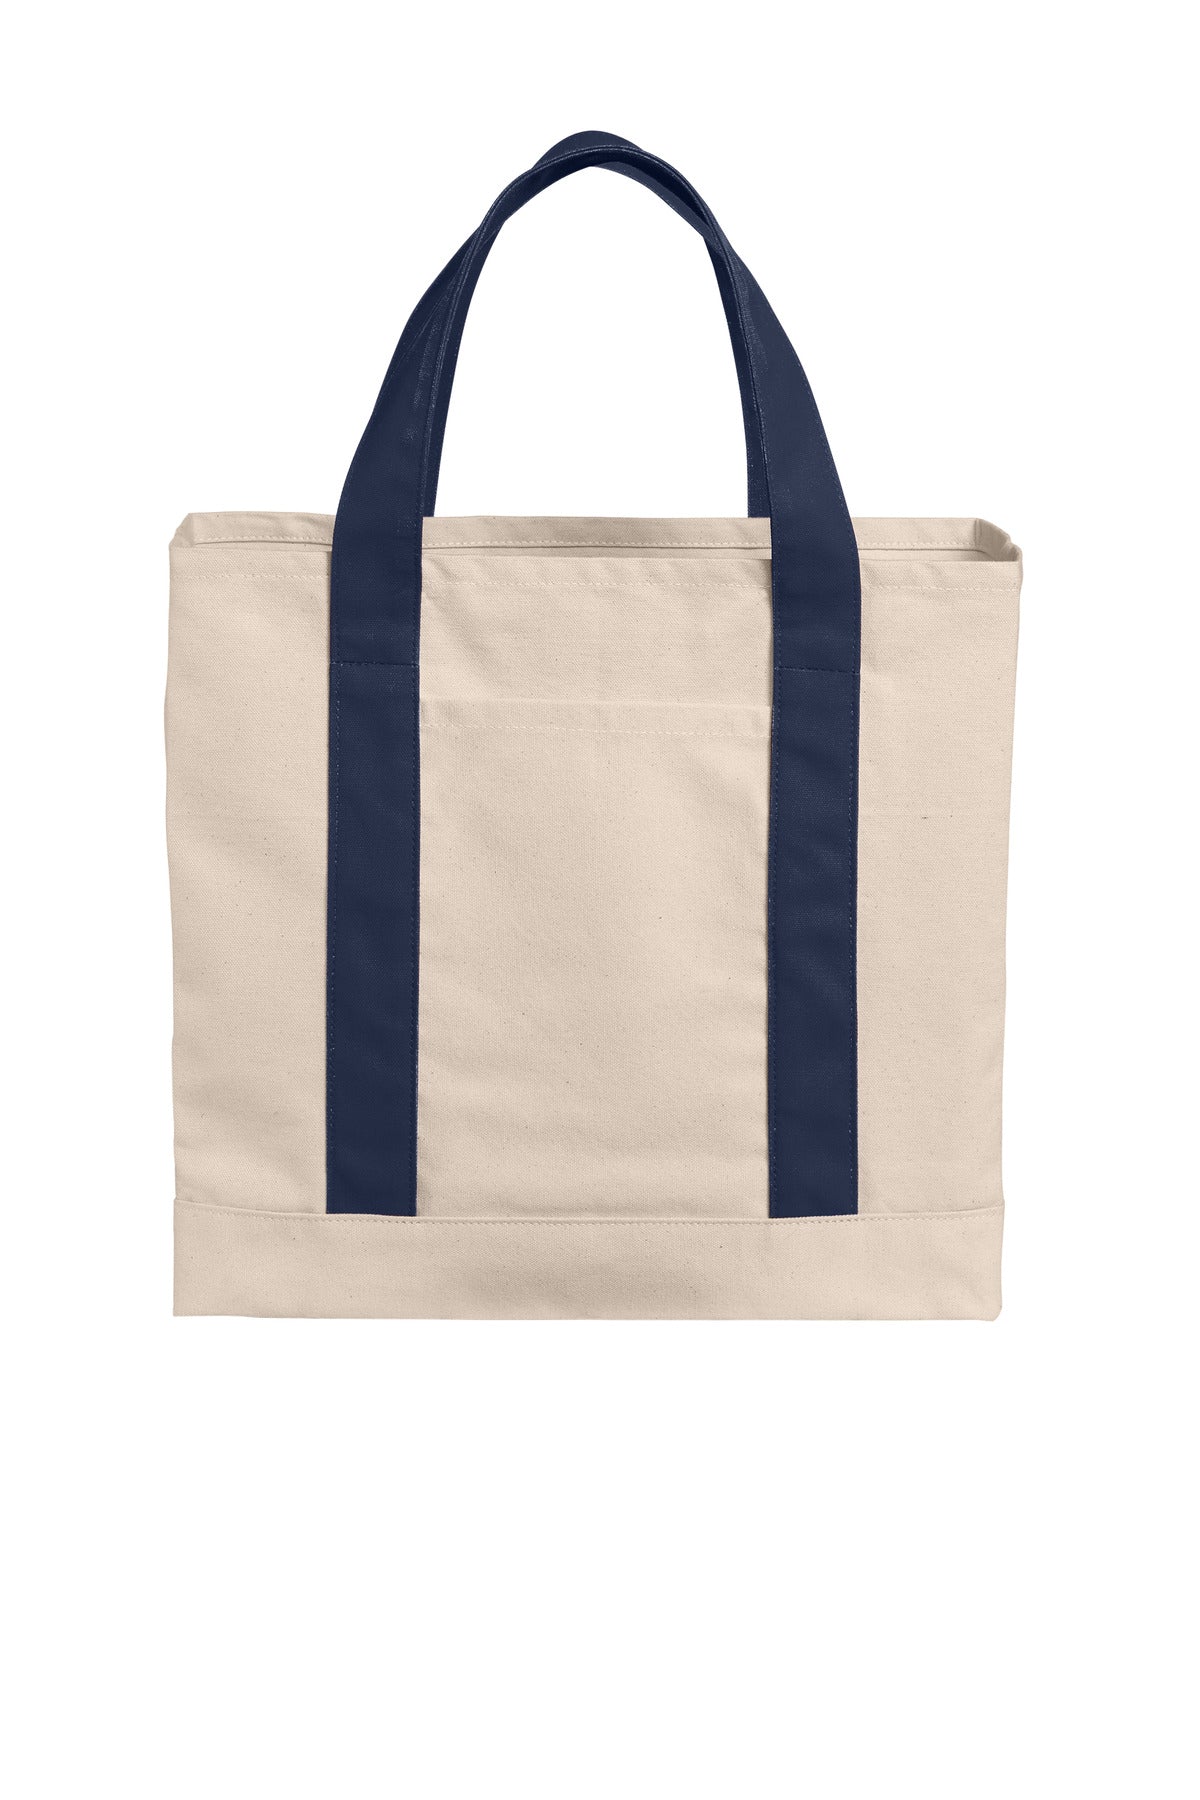 Bags Natural/ River Blue Navy OSFA Port Authority